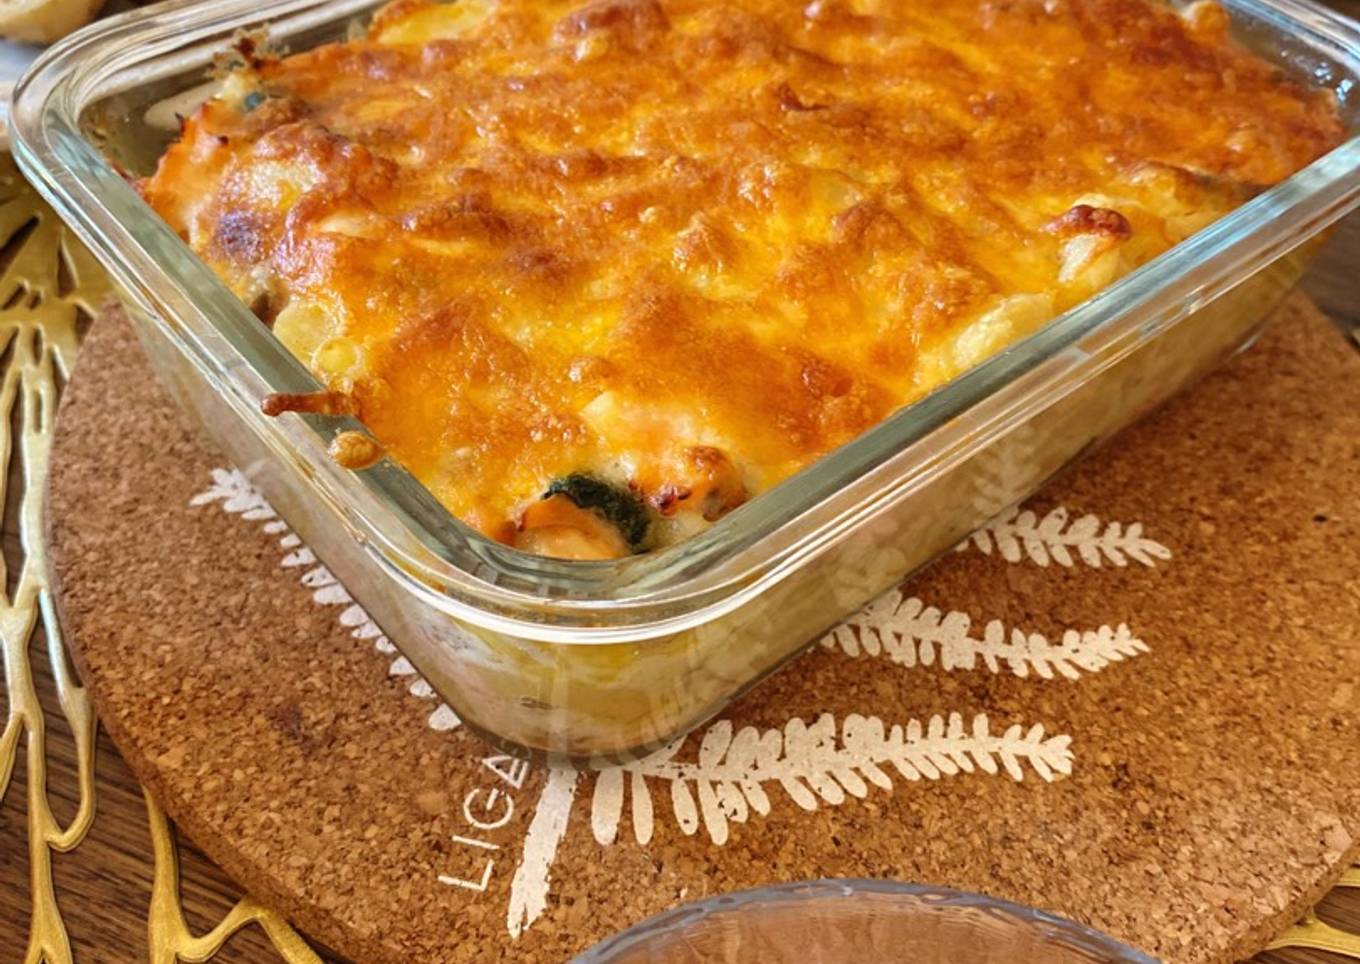 Gratin with salmon and spinach – A main dish for my husband’s birthday dinner 🎂